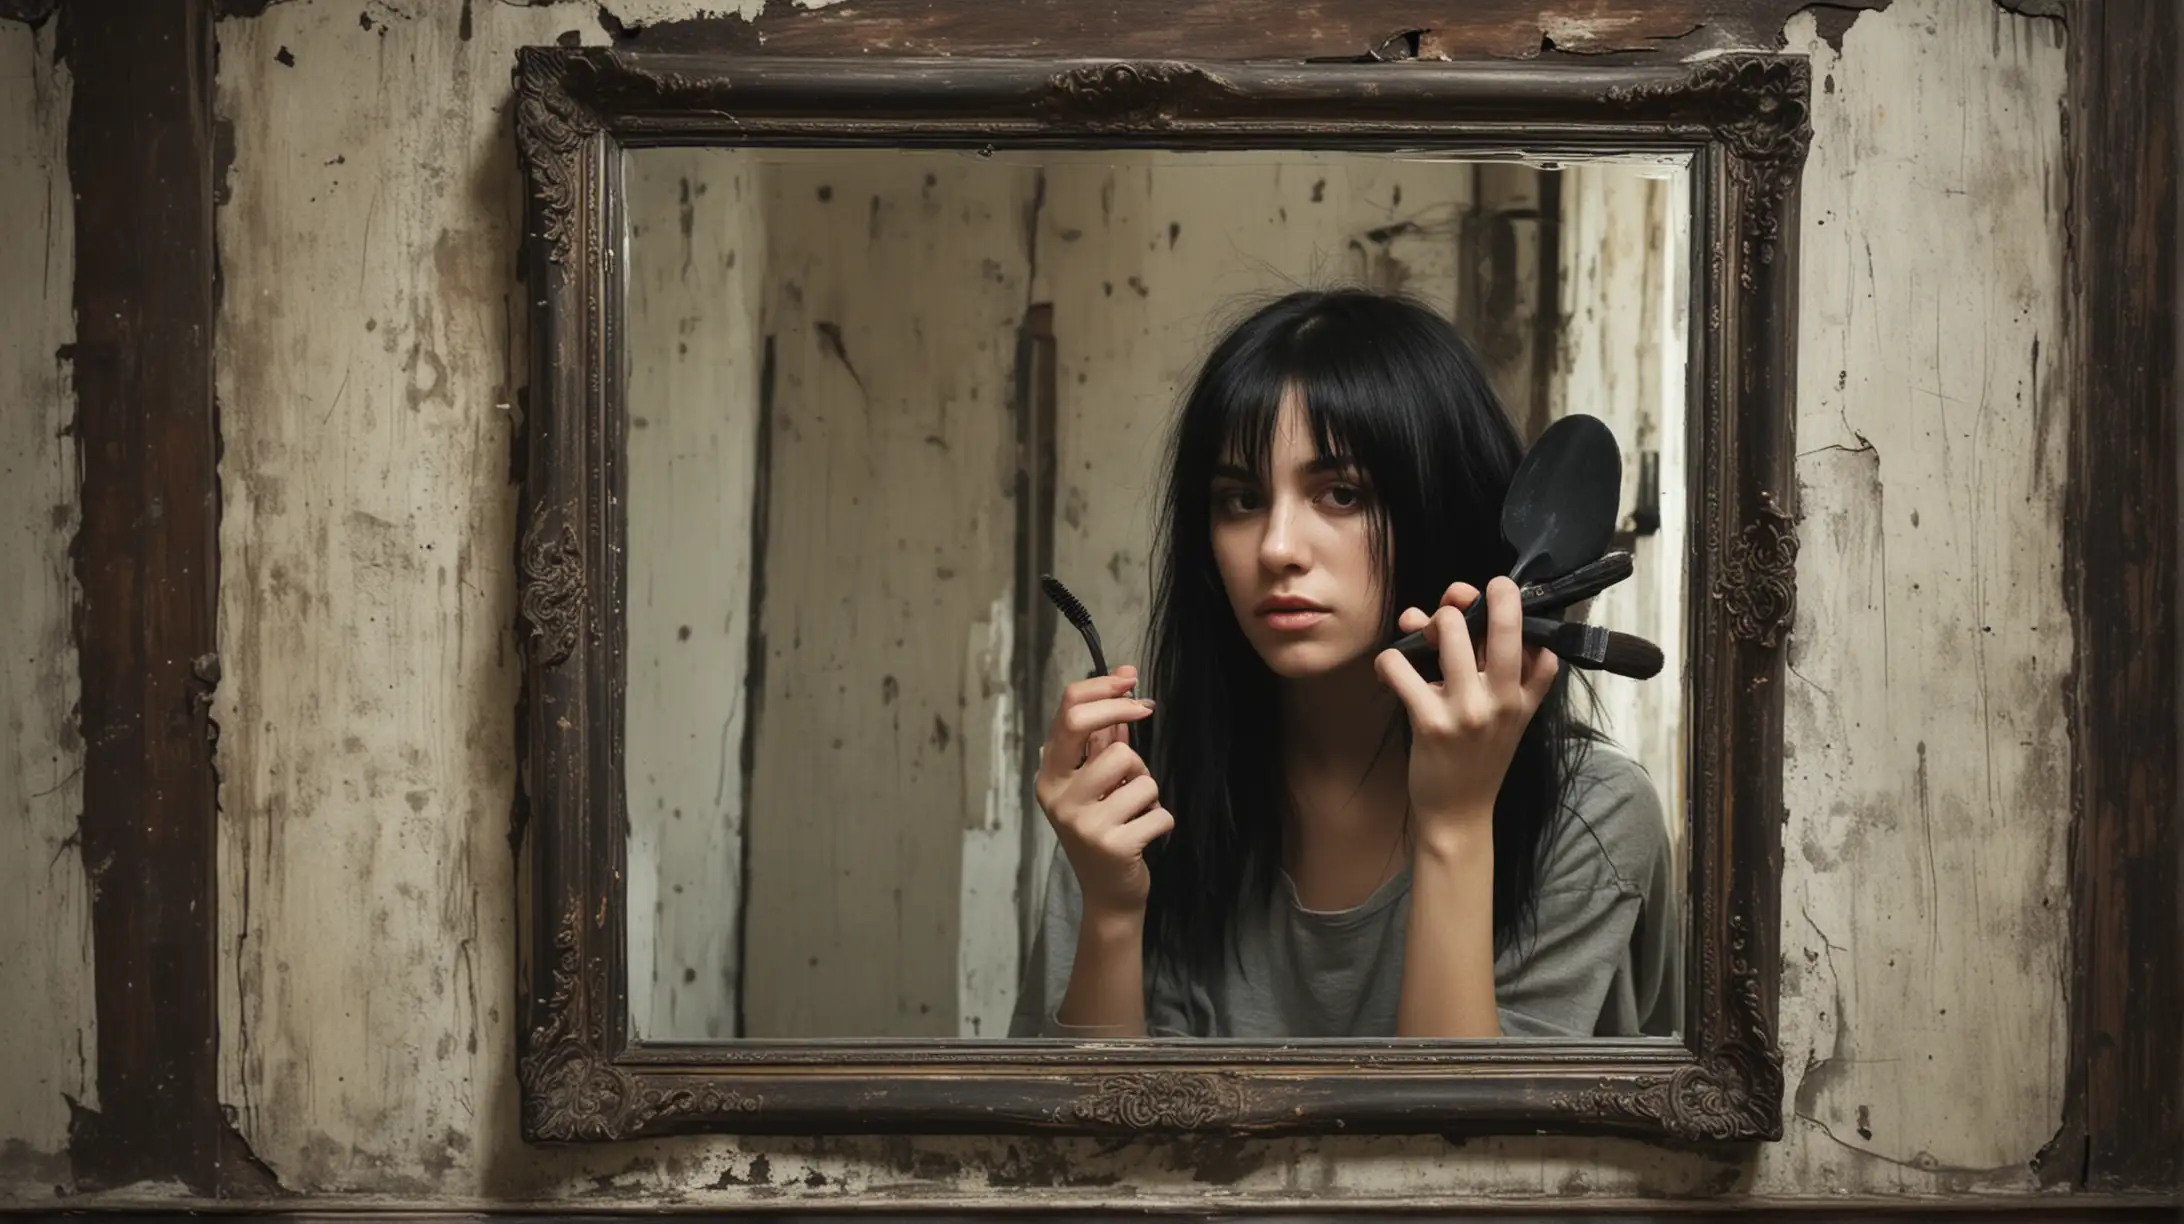 ragazza with black hair brushes herself reflected in the old faceless mirror, grunge atmosphere